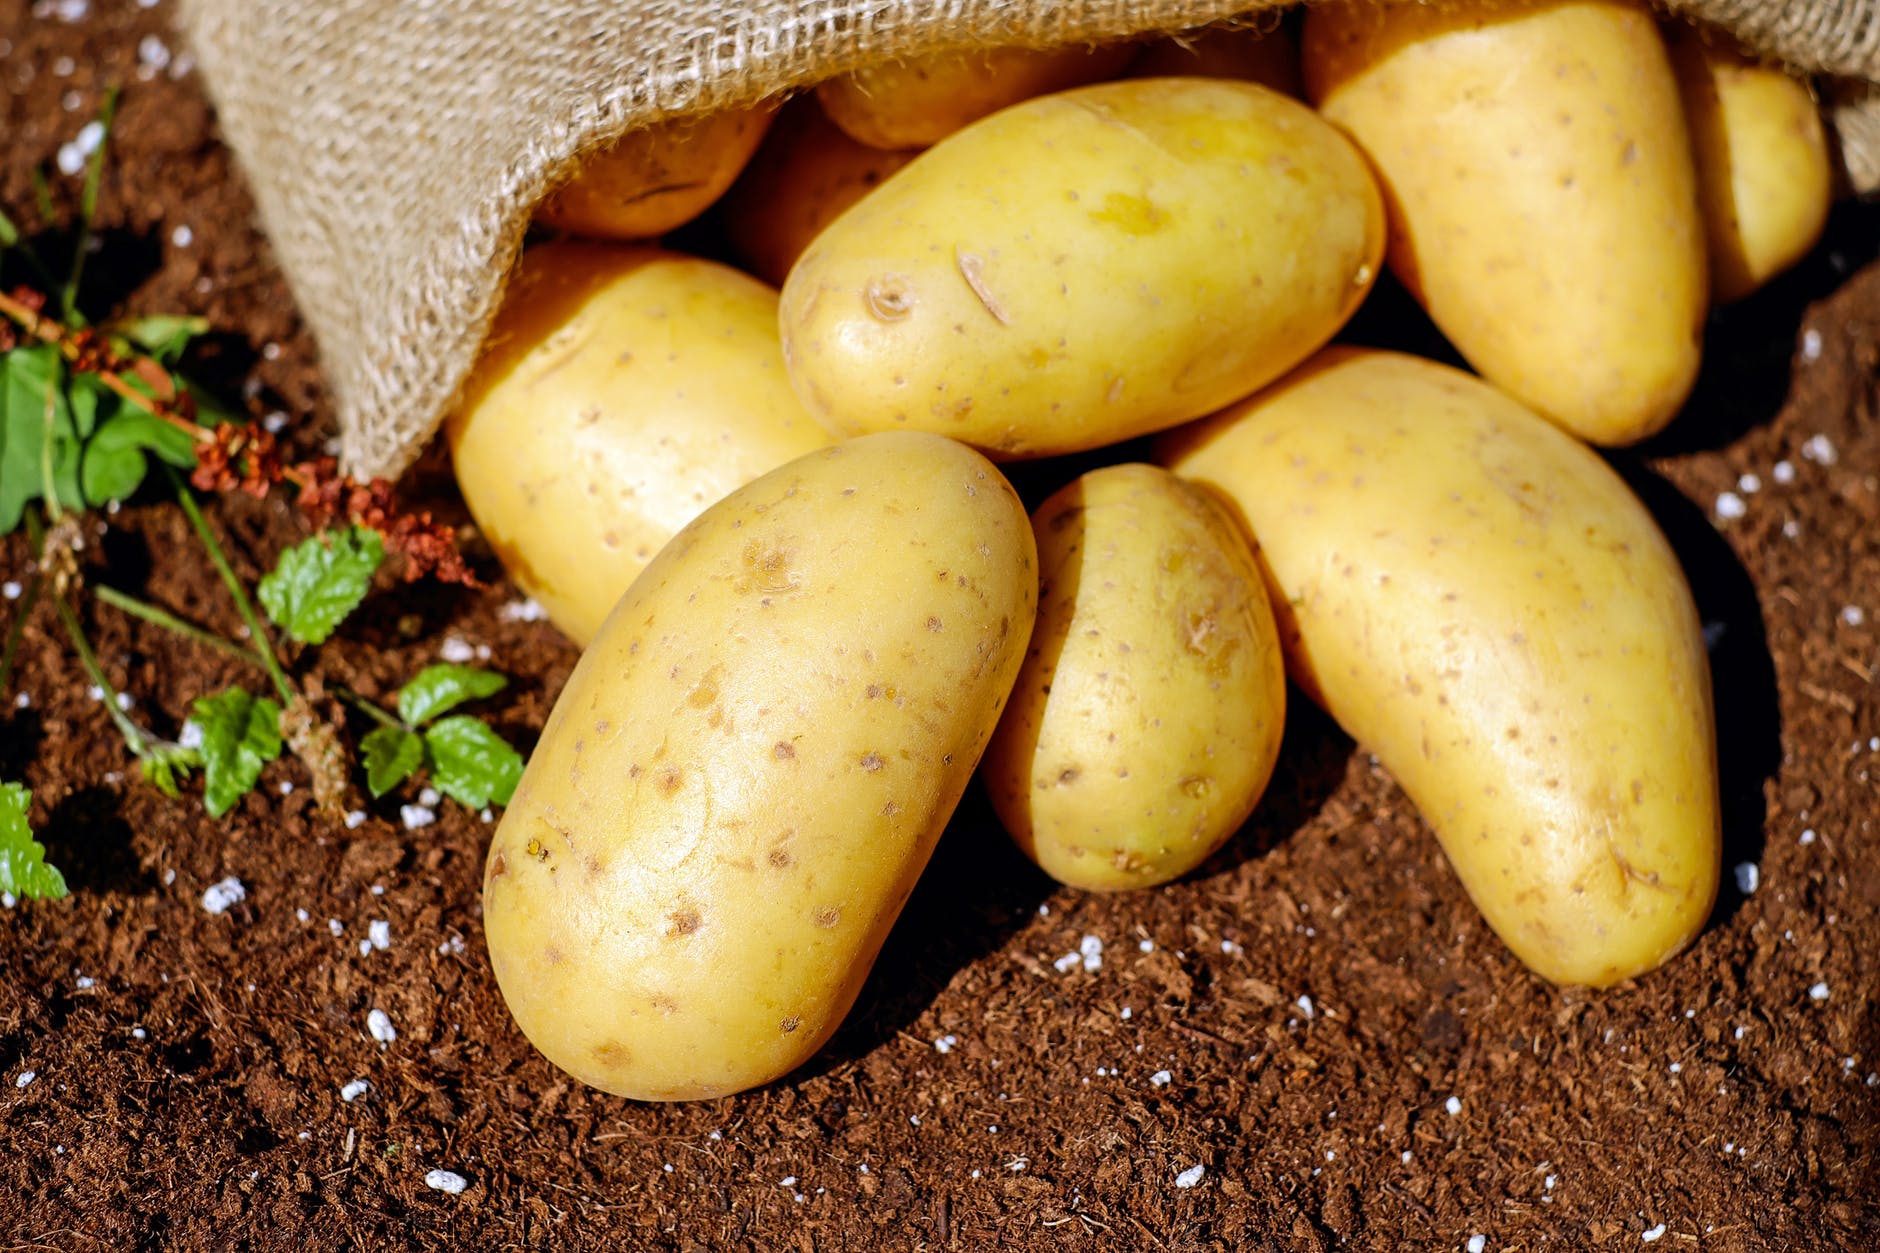 potatoes - most popular foods in the world